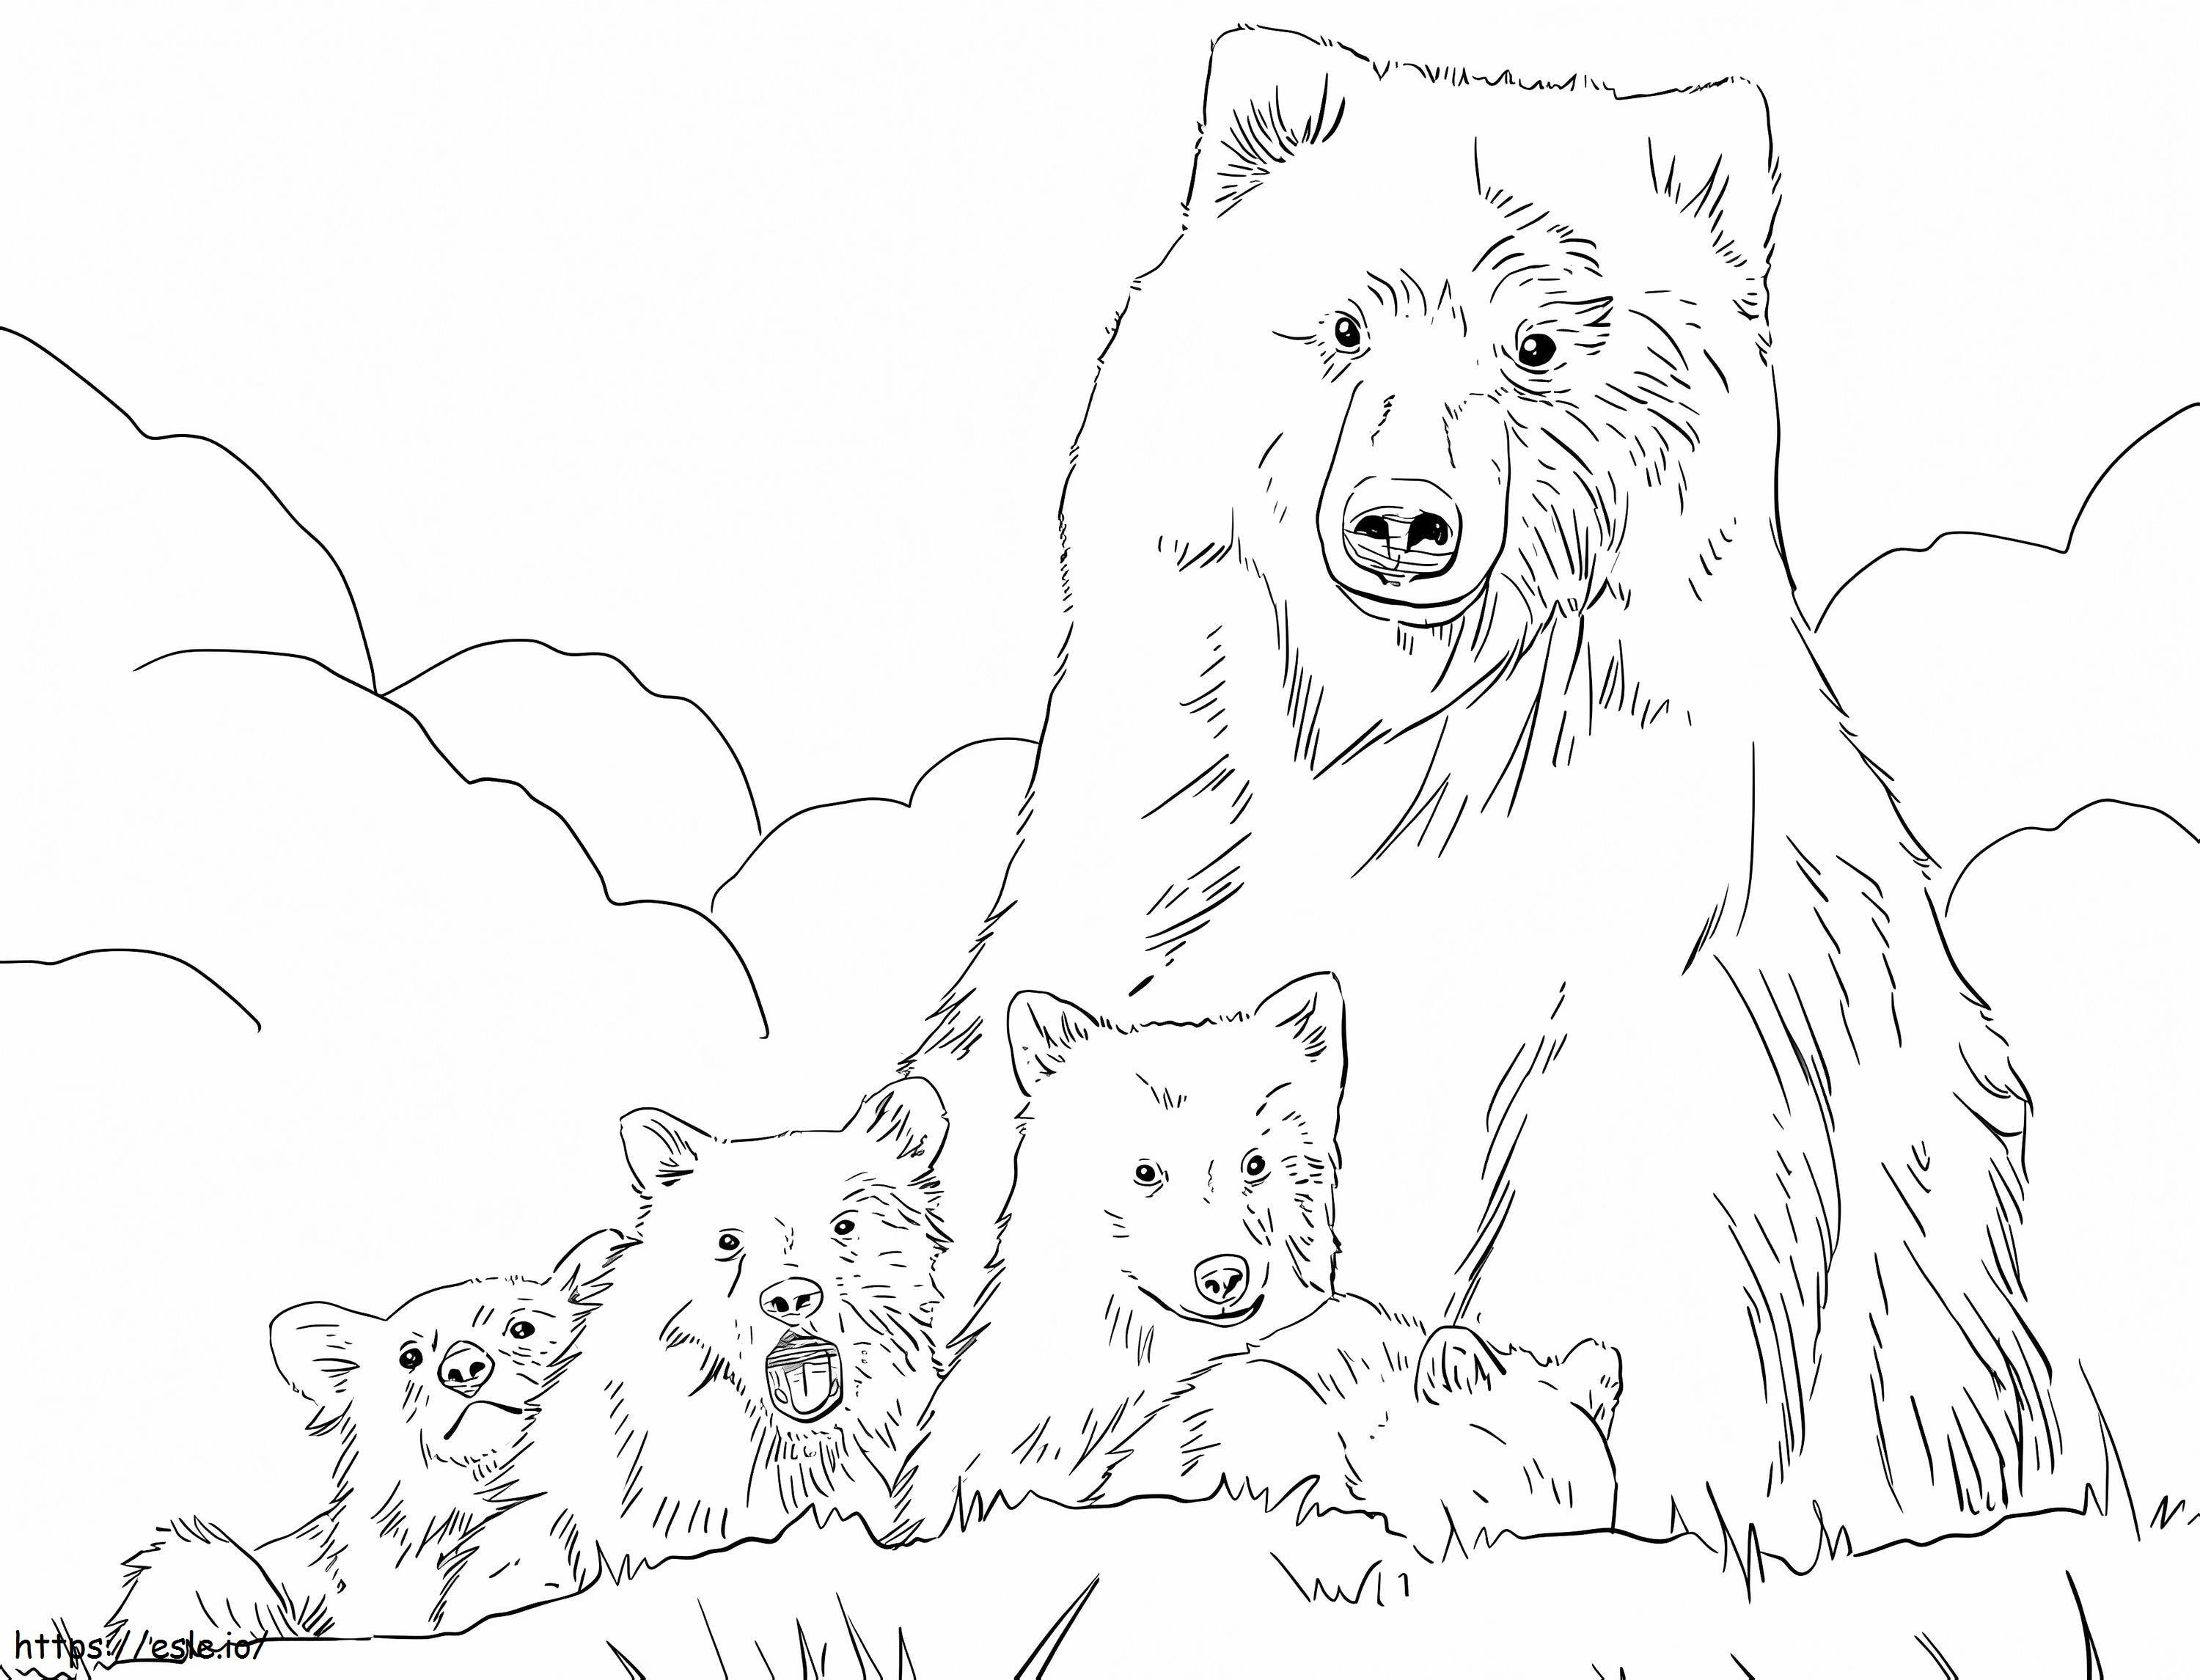 Brown Bears 1 coloring page